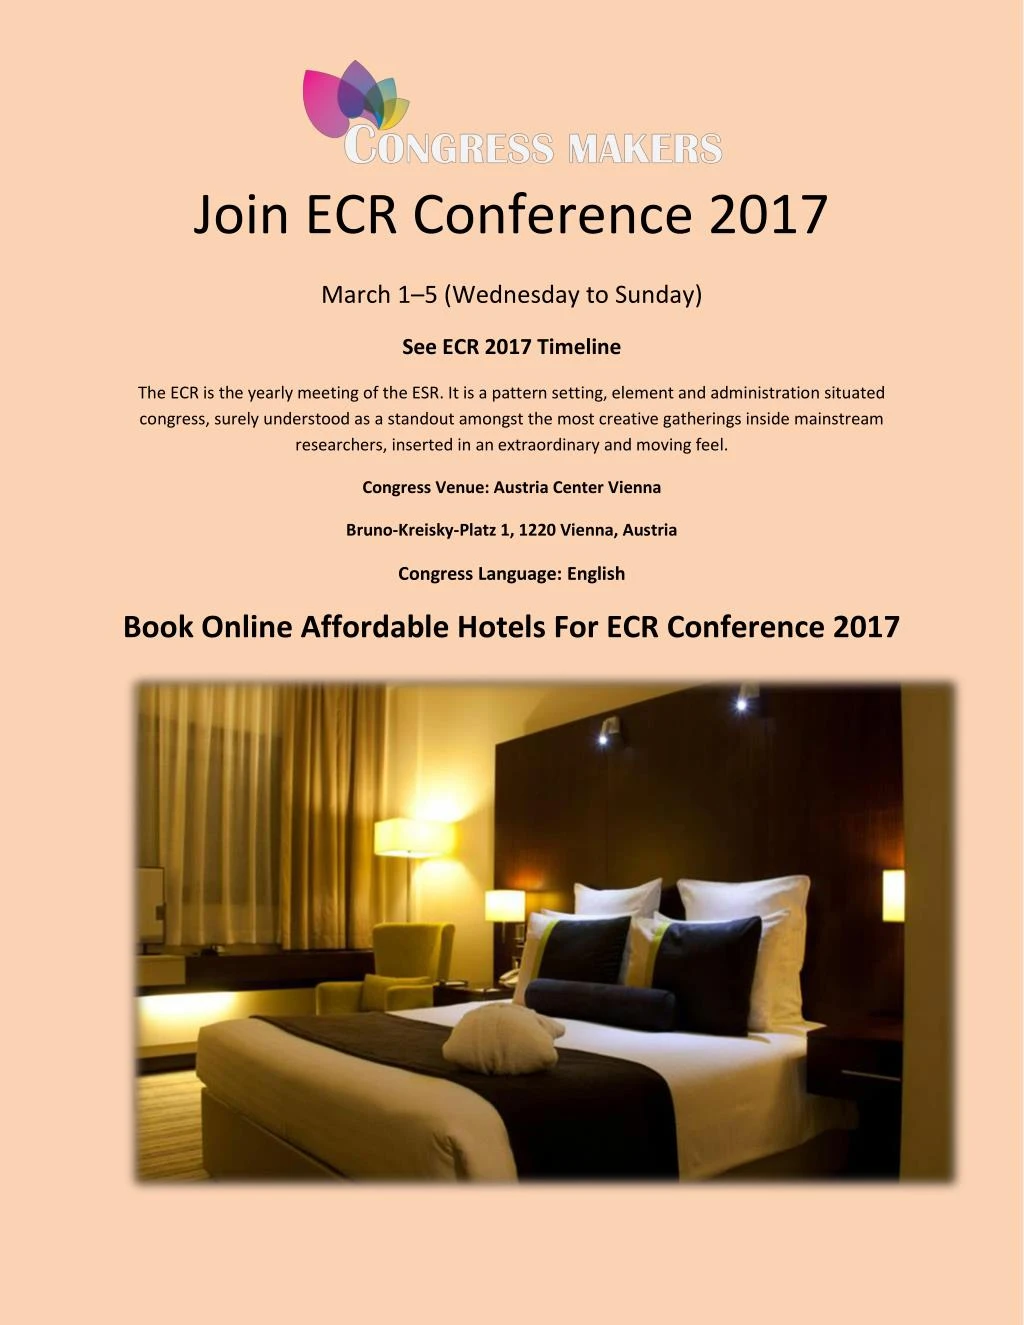 PPT Join ECR Conference 2017 in Vienna, Austria PowerPoint